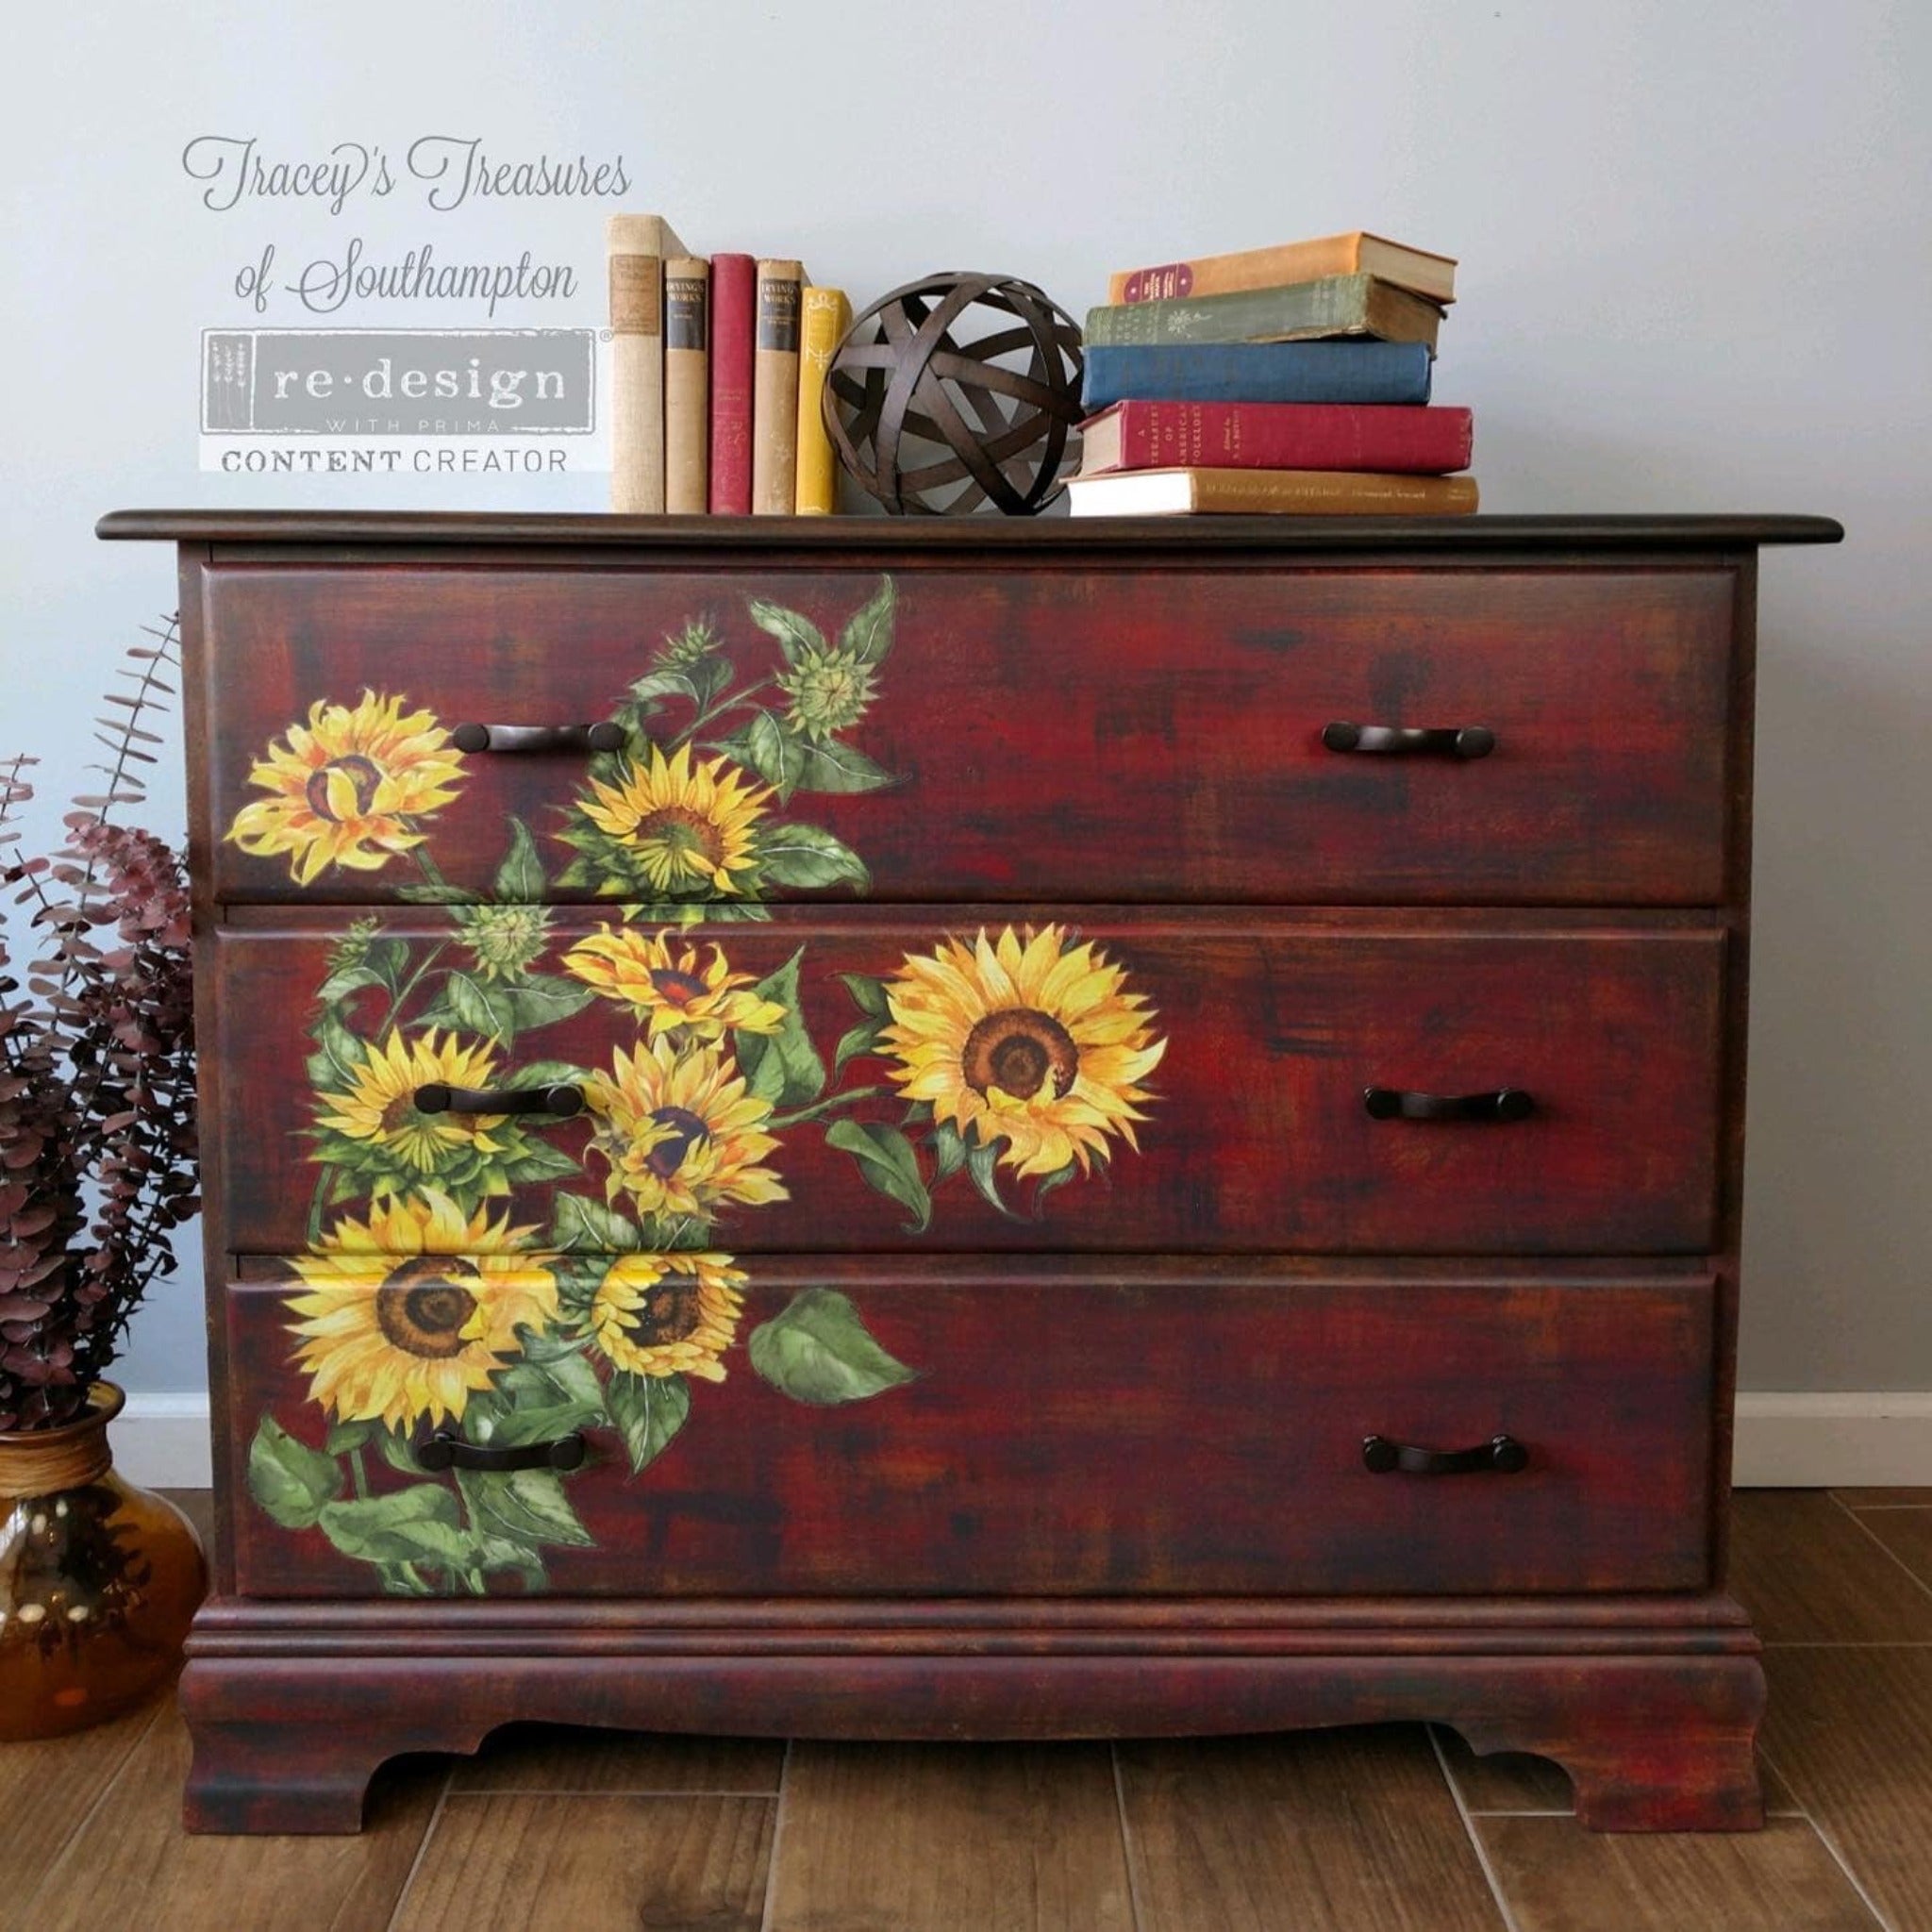 A 3-drawer dresser refurbished by Tracey's Treasures of Southampton is painted a blend of red, black, and mustard yellow and features ReDesign with Prima's Sunflower transfer on the left side of the front of its drawers.